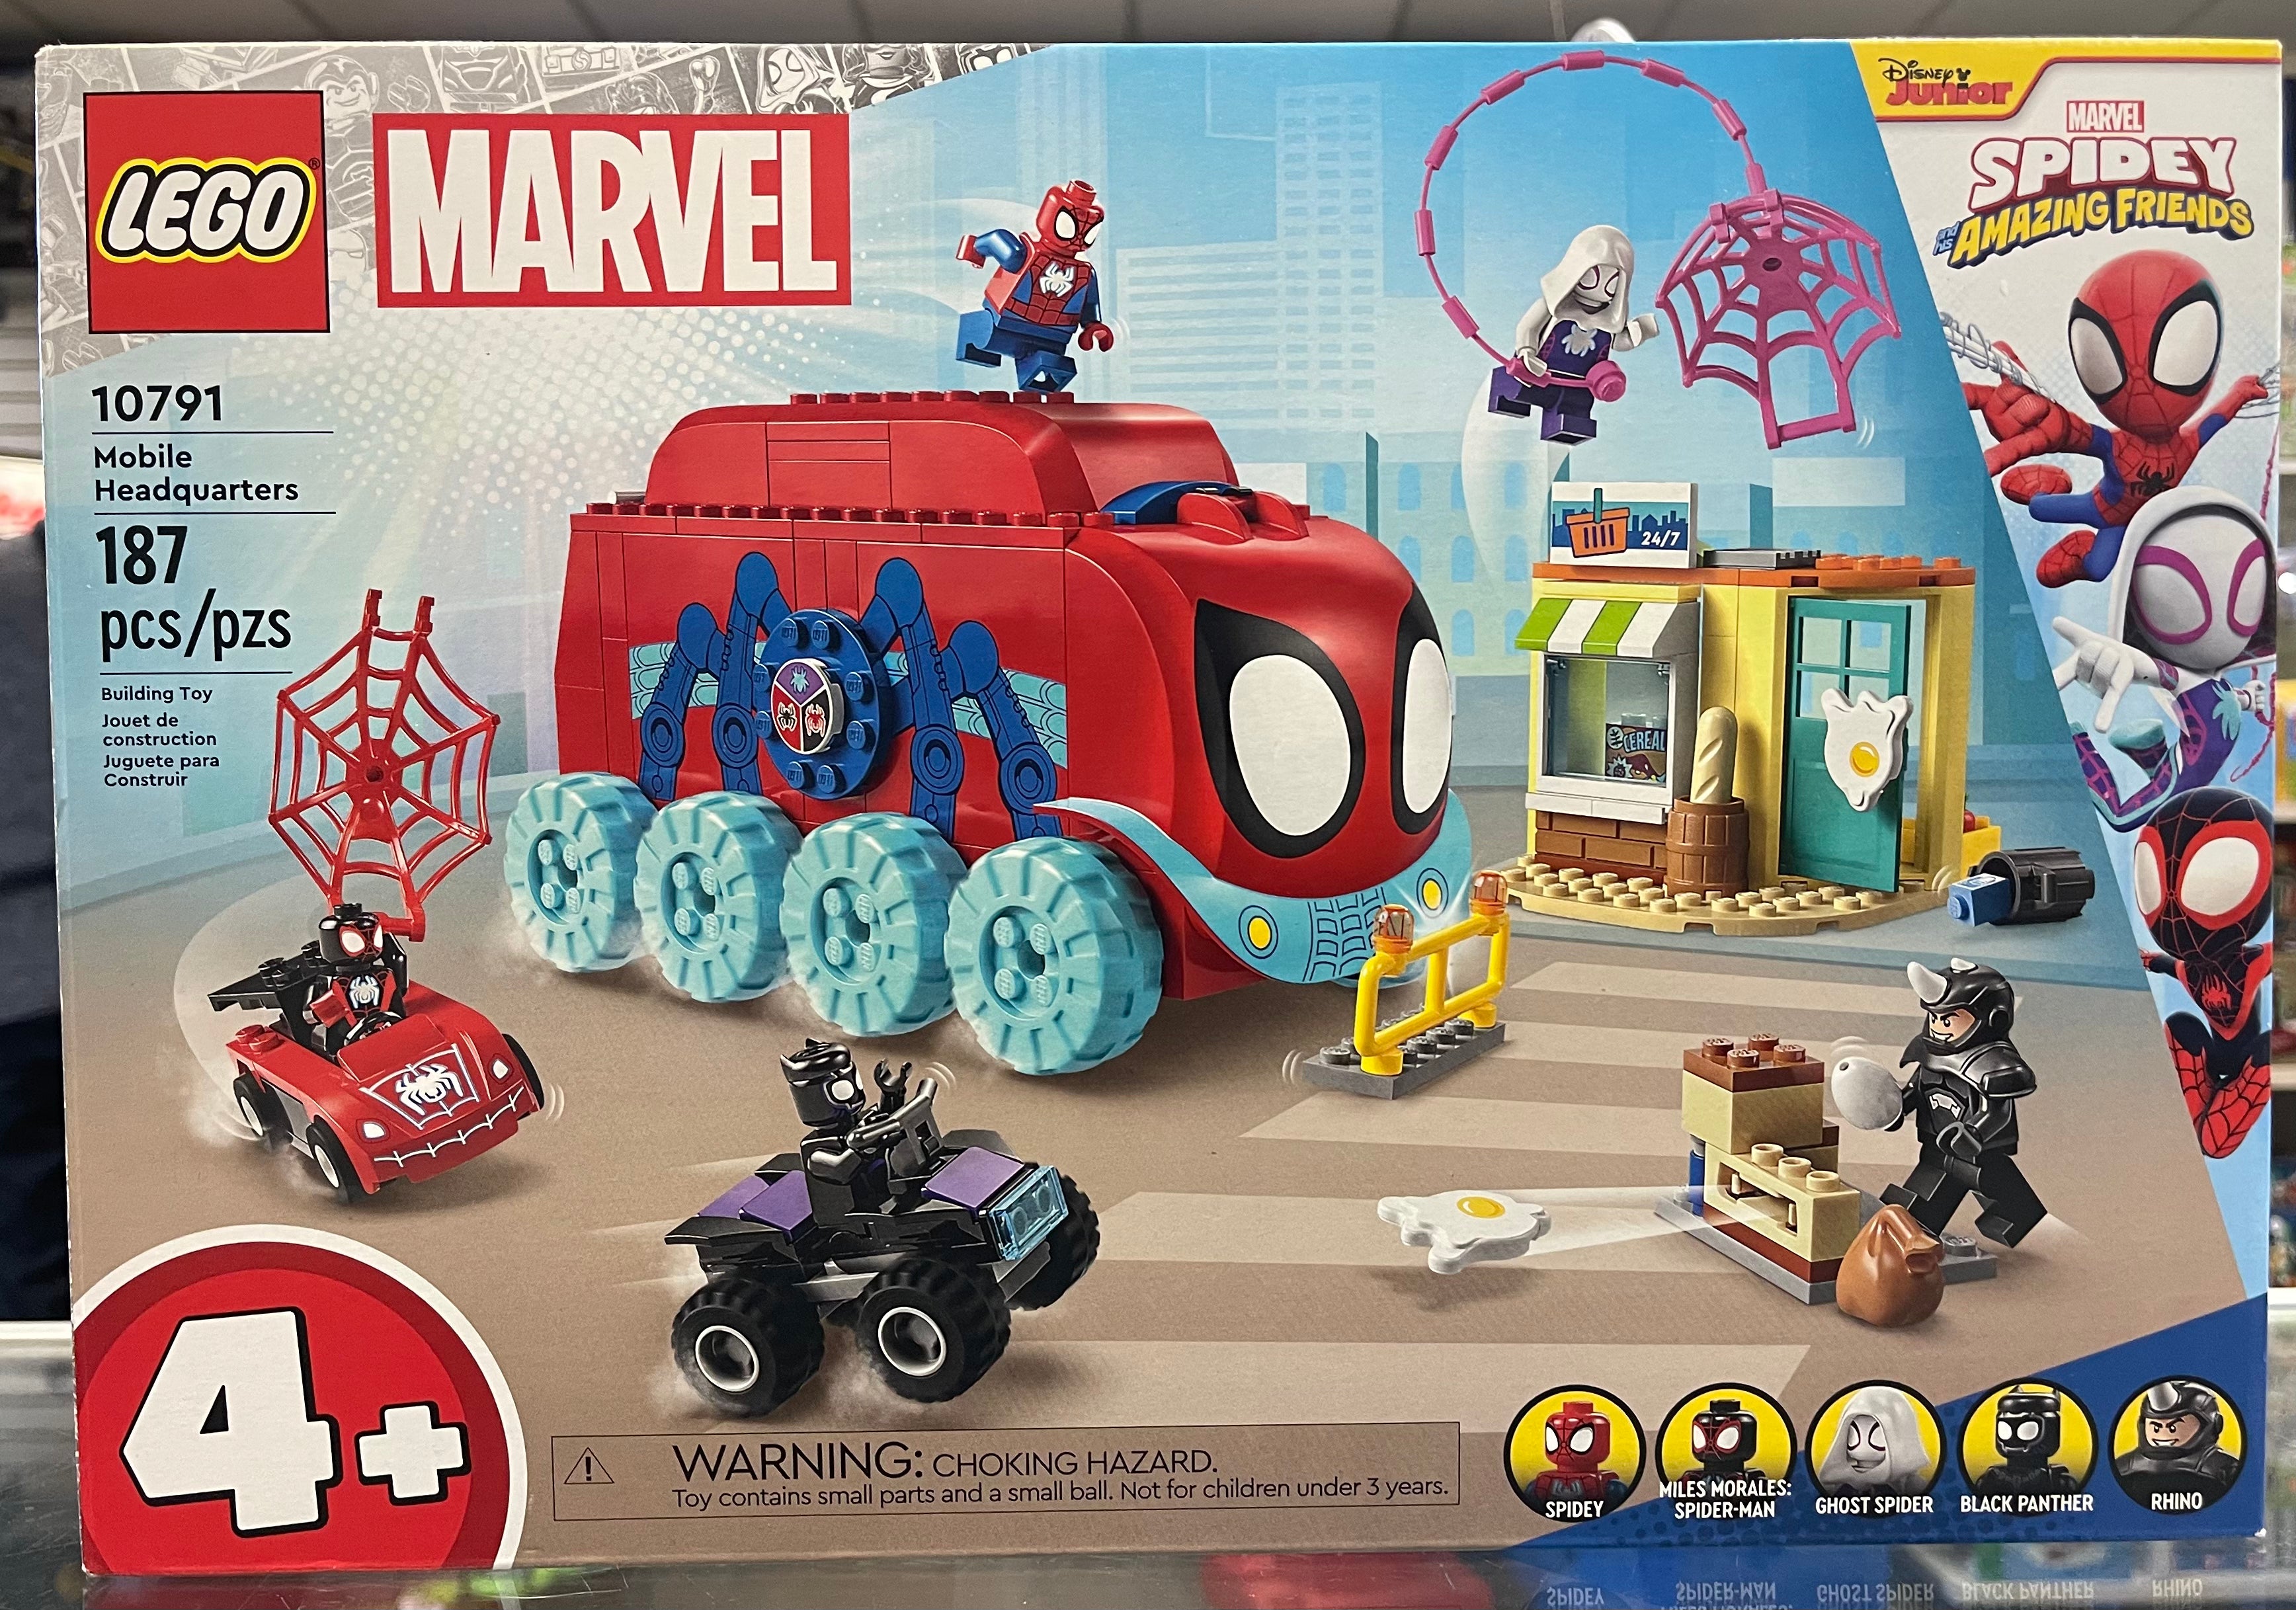 Spidey and his Amazing Friends: Mobile Headquarters, 10791